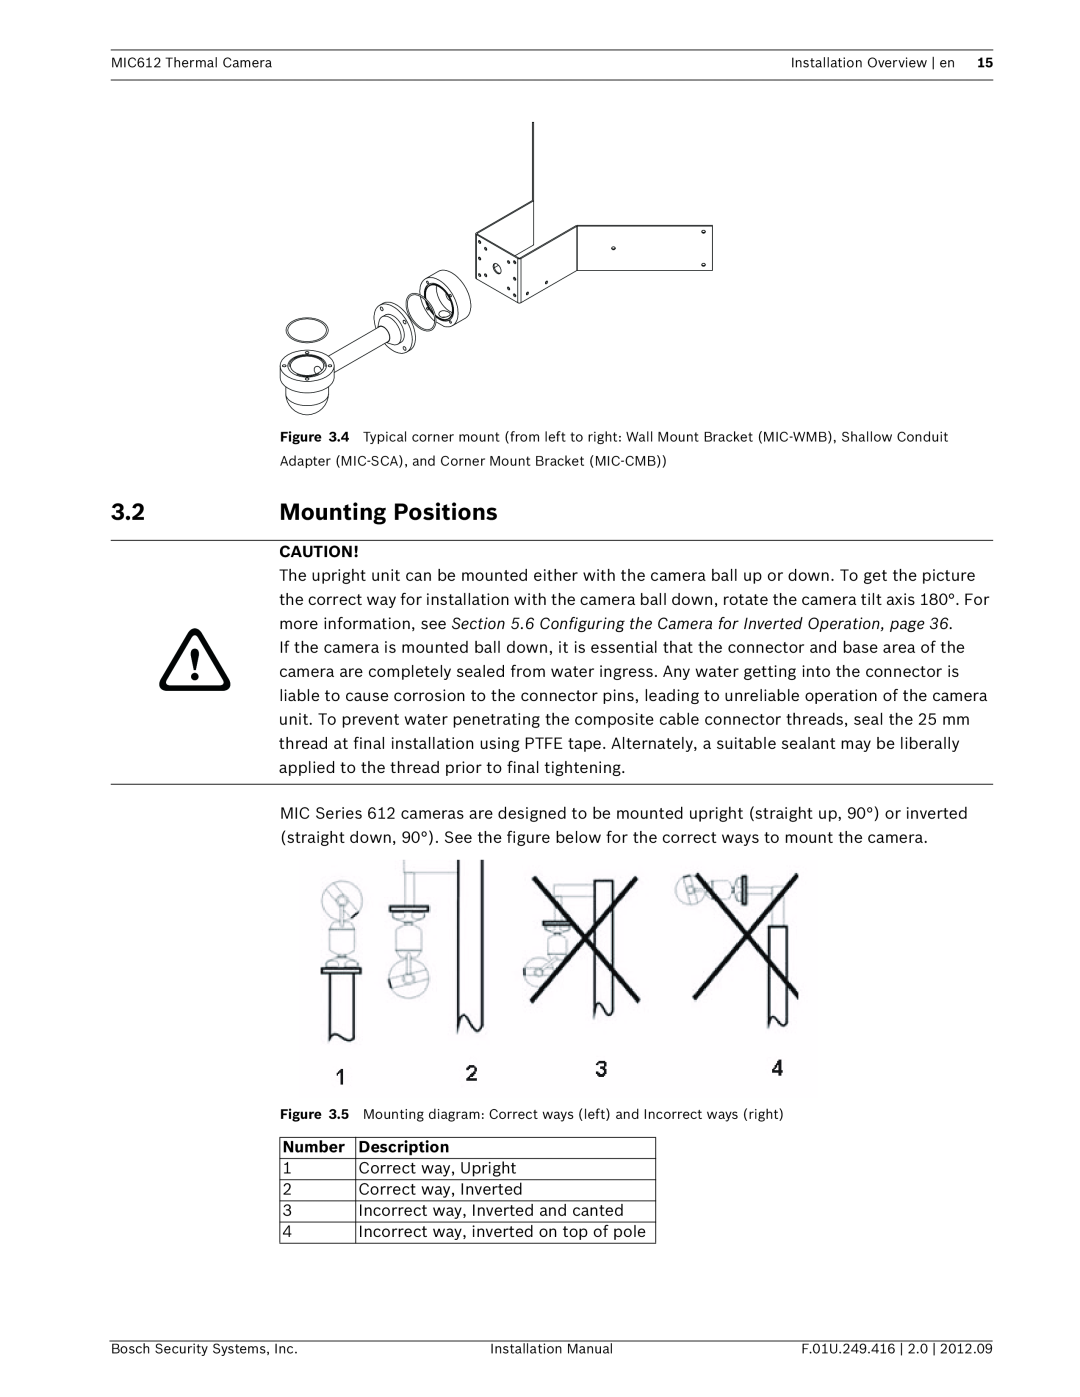 Bosch Appliances MIC612 installation manual Mounting Positions 